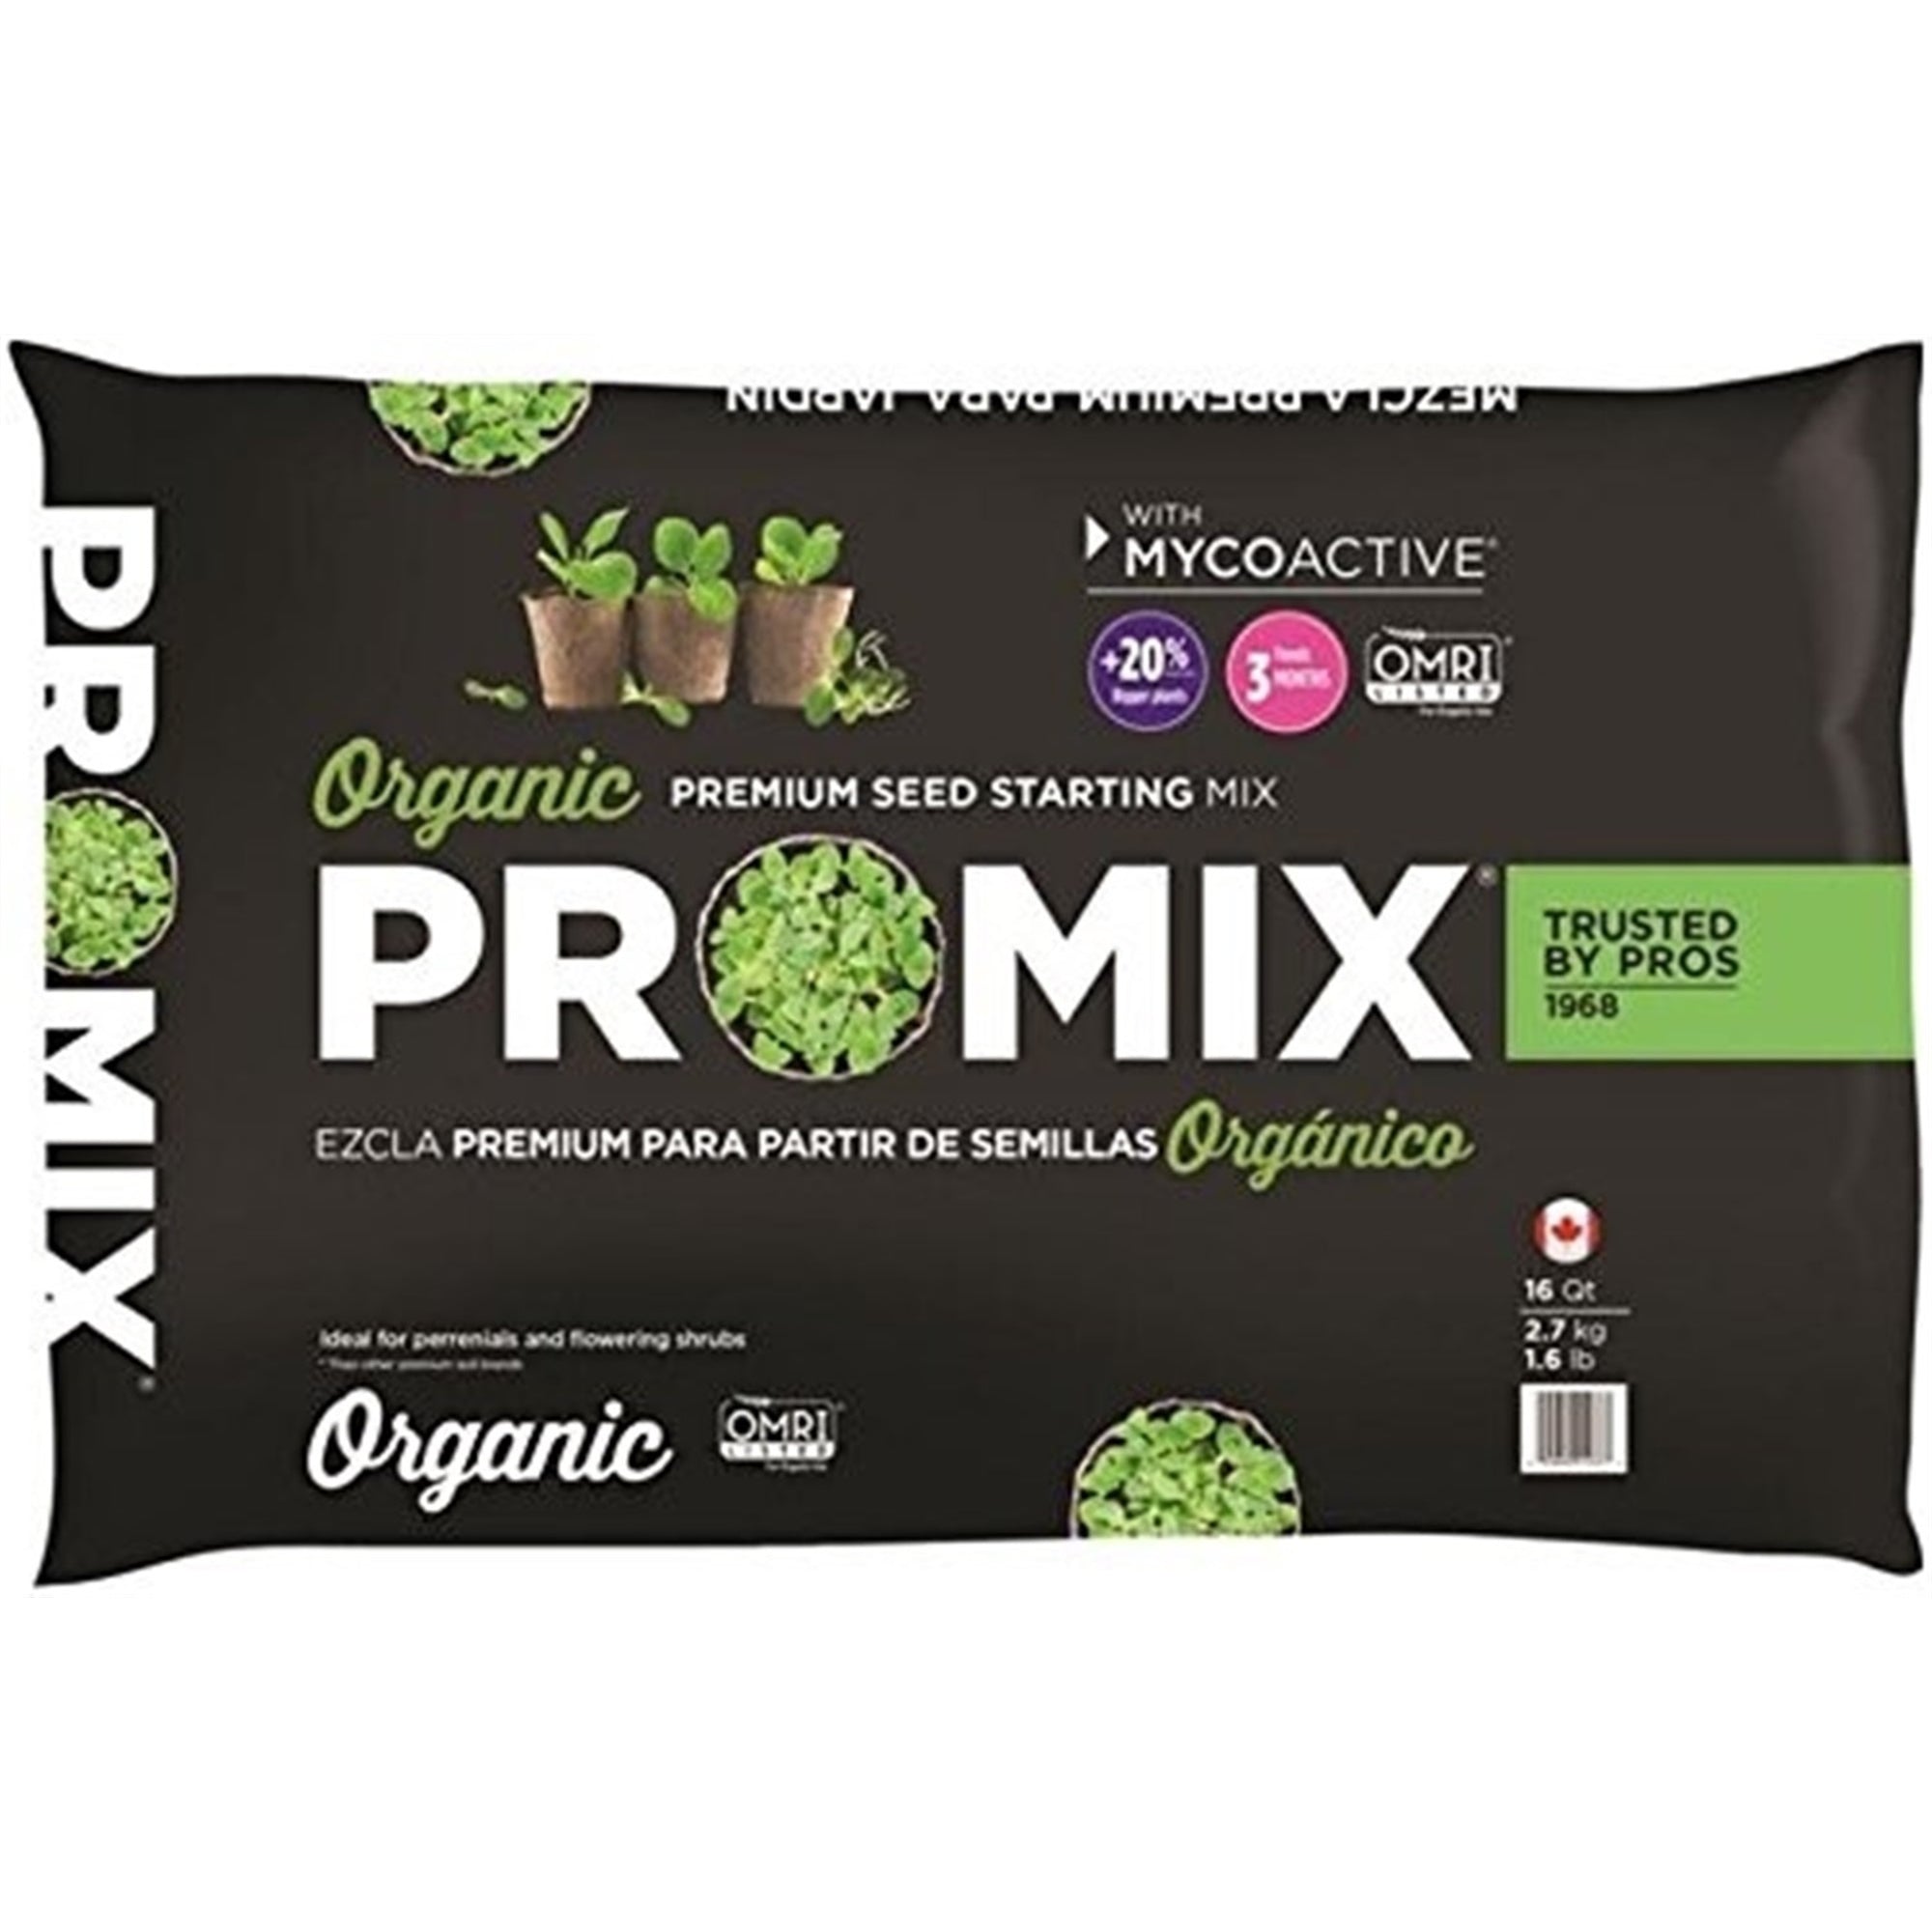 Premier Horticulture Pro Mix Organic Seed Starting Mix with Mycoactive, 16 Quart